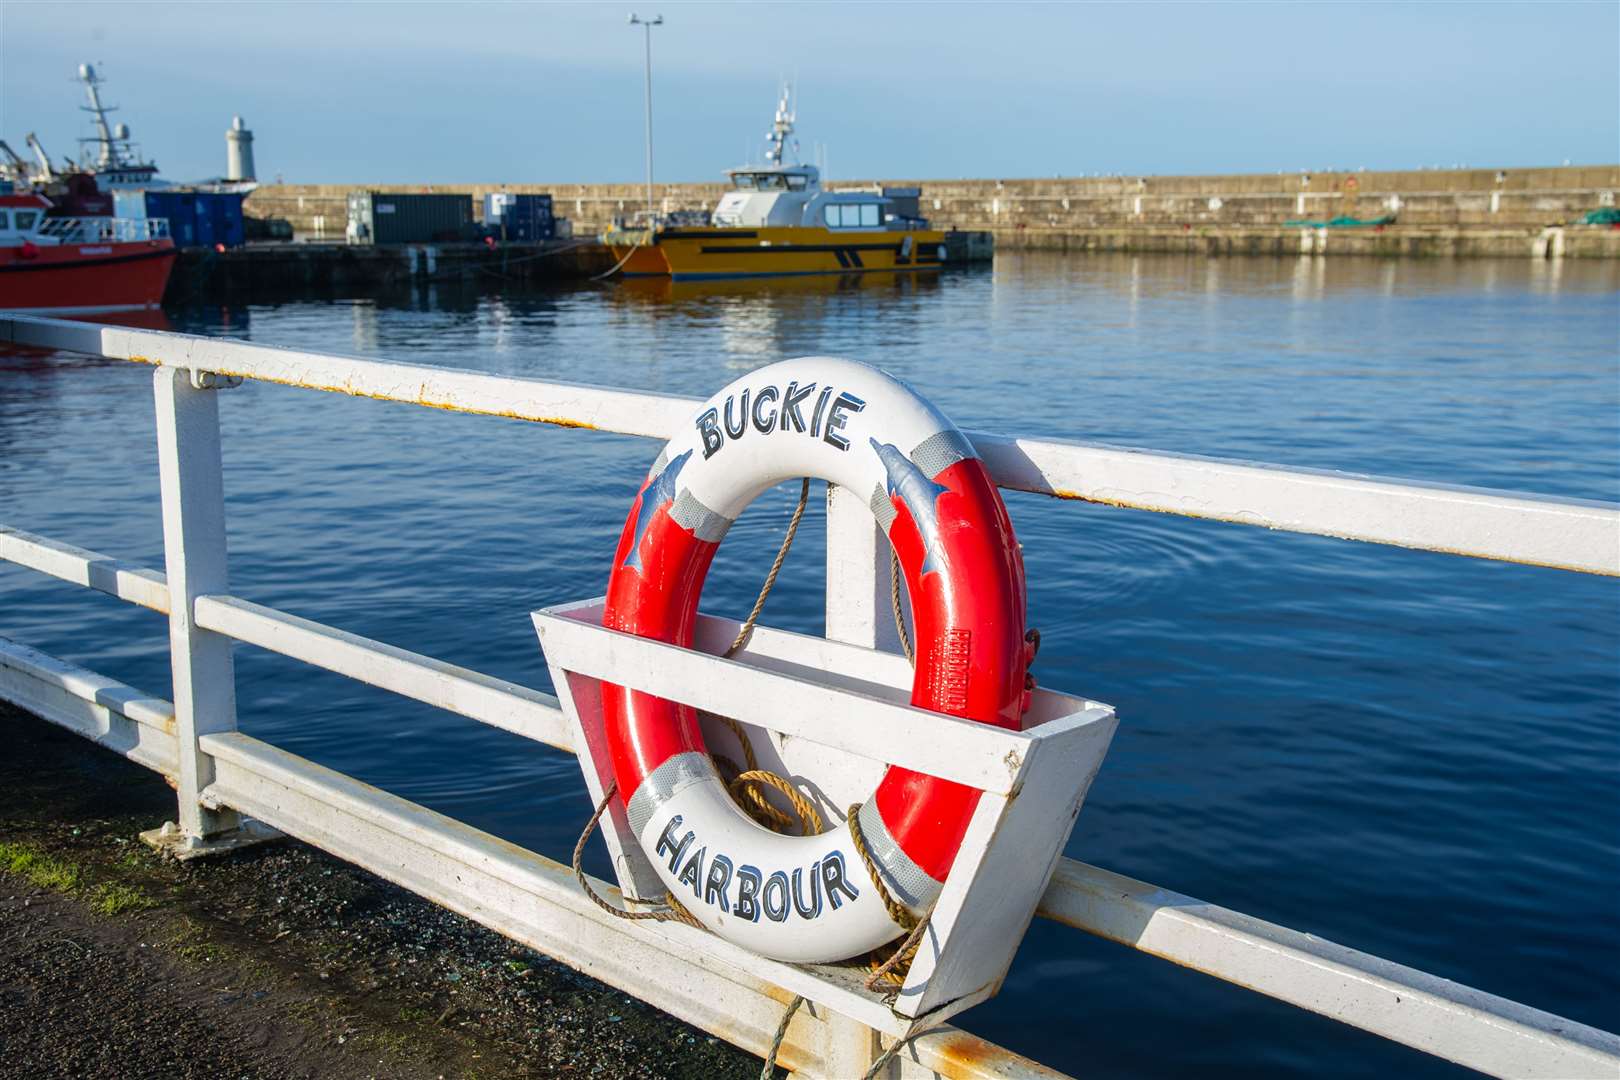 The festive holidays meant there were no fish landings at Buckie last week. Picture: Daniel Forsyth